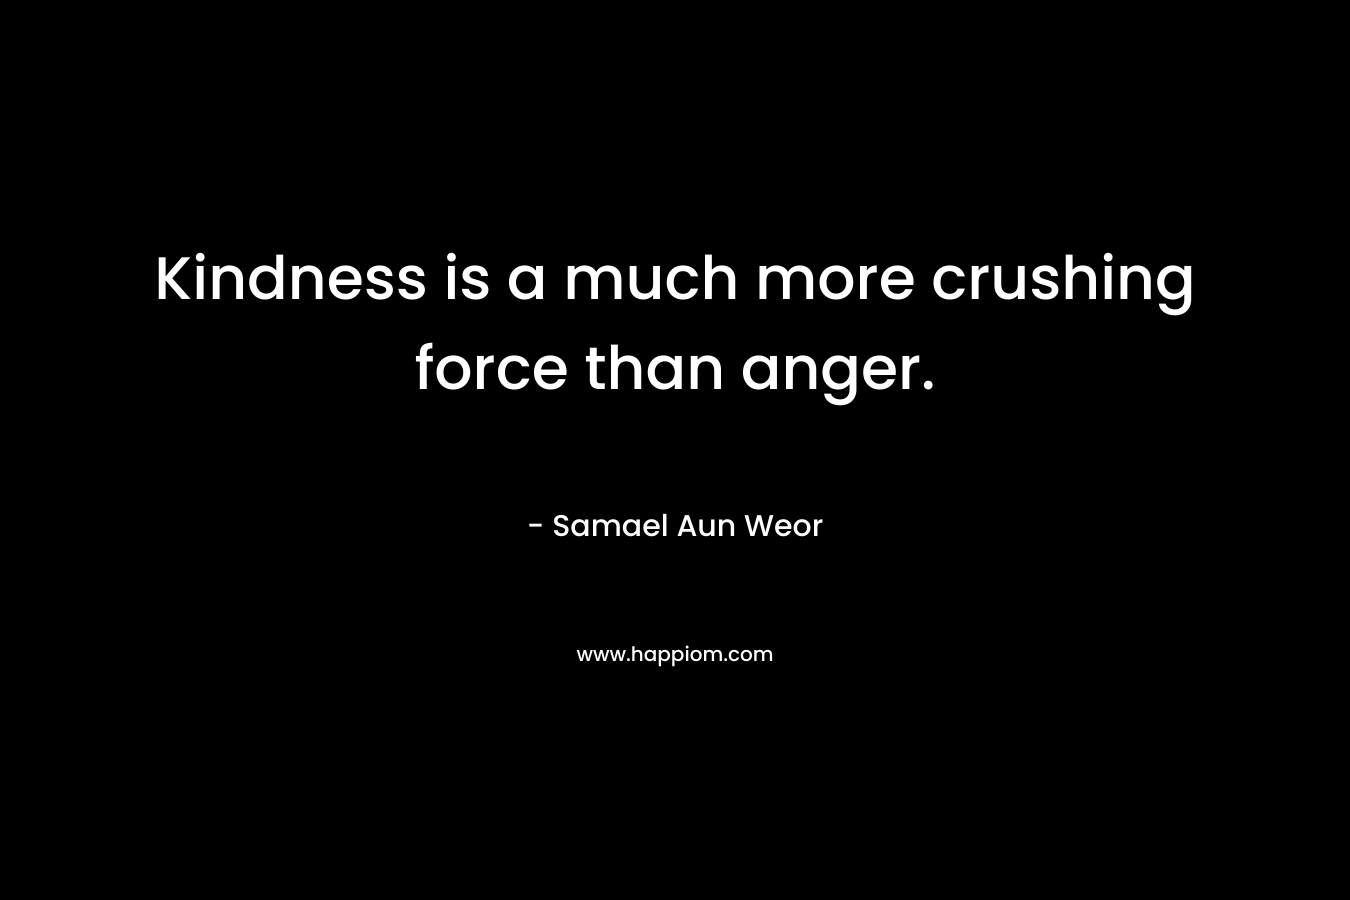 Kindness is a much more crushing force than anger. – Samael Aun Weor